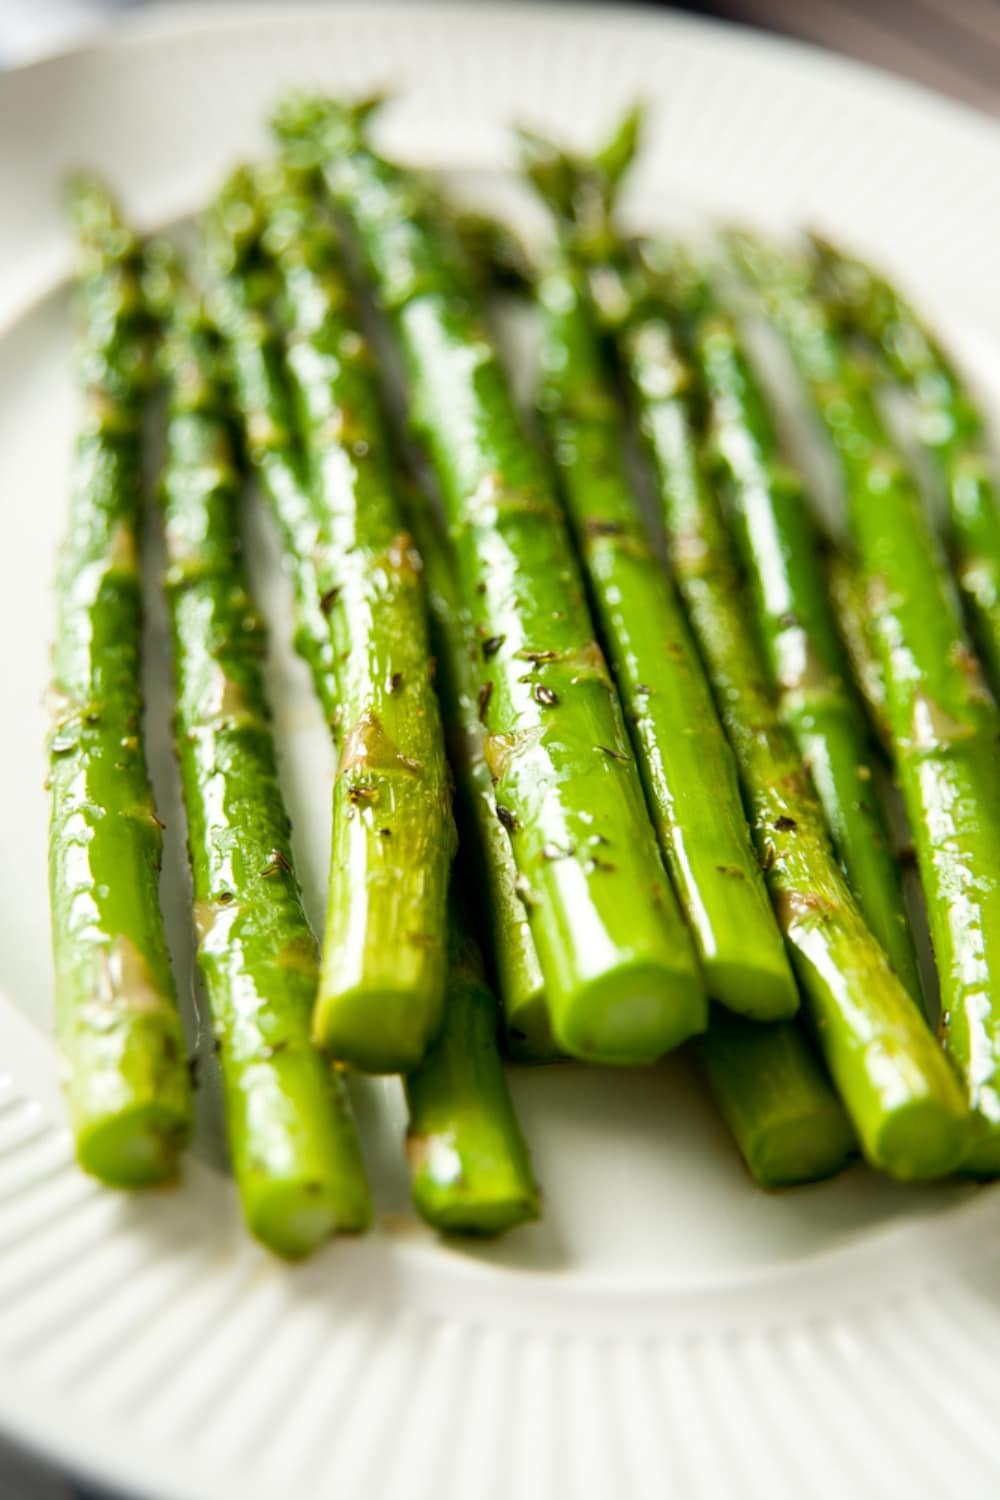 Baked and Seasoned Asparagus on a Plate